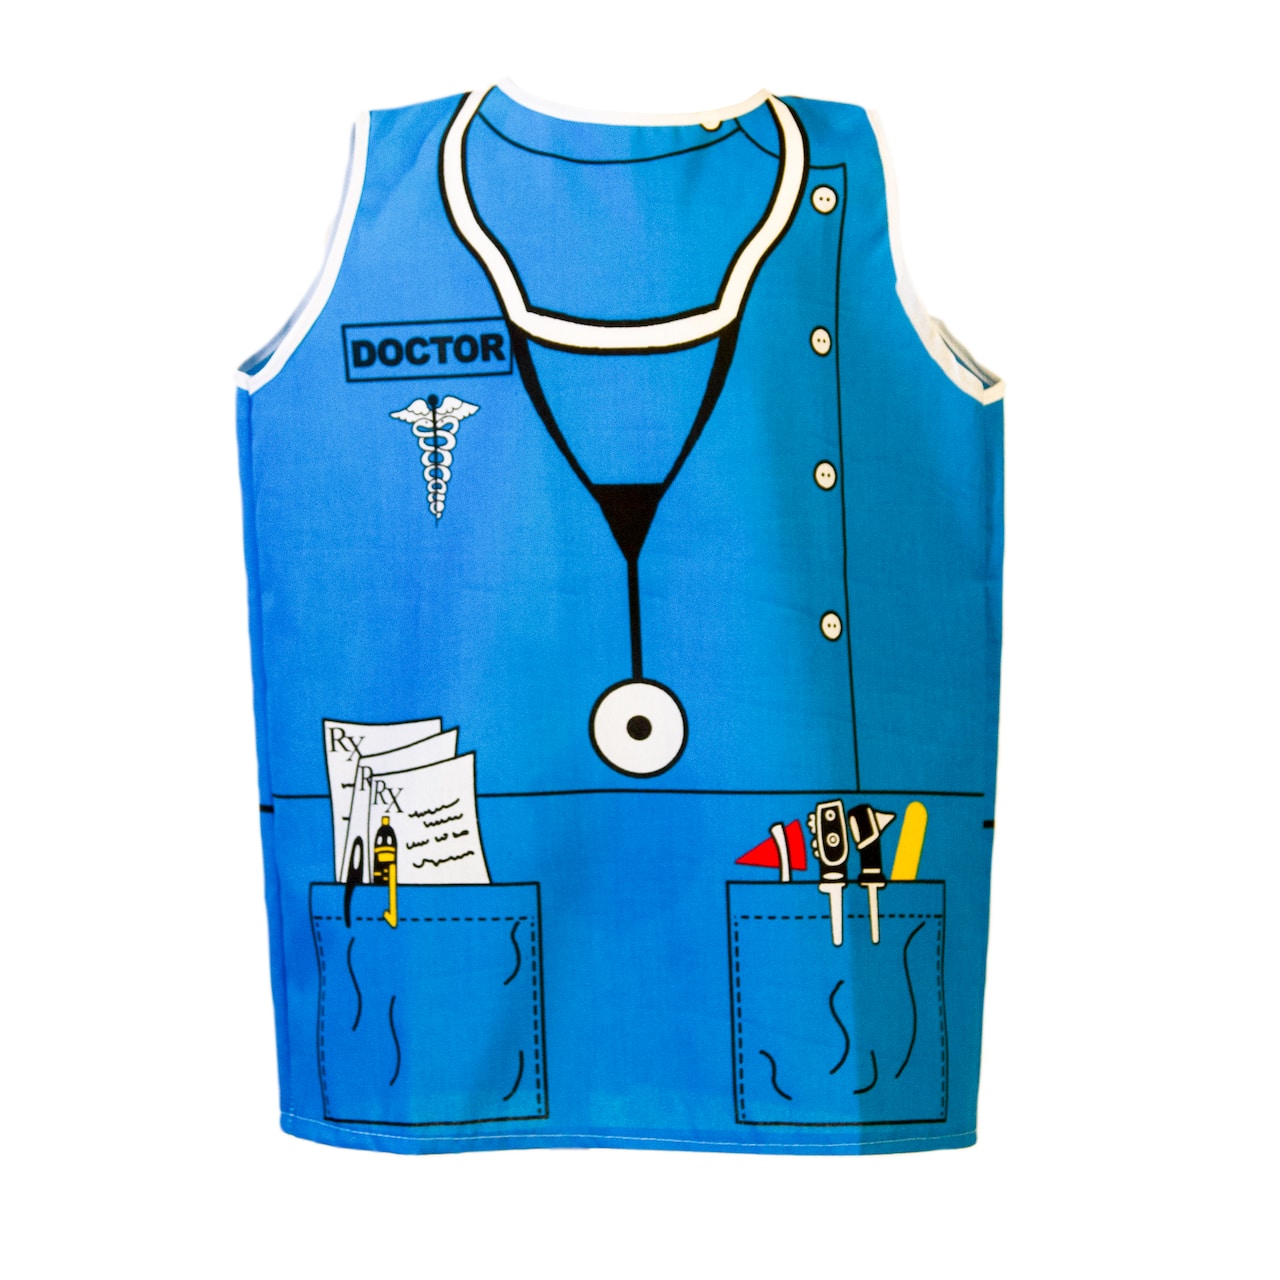 Dexter Educational Play Doctor Costume